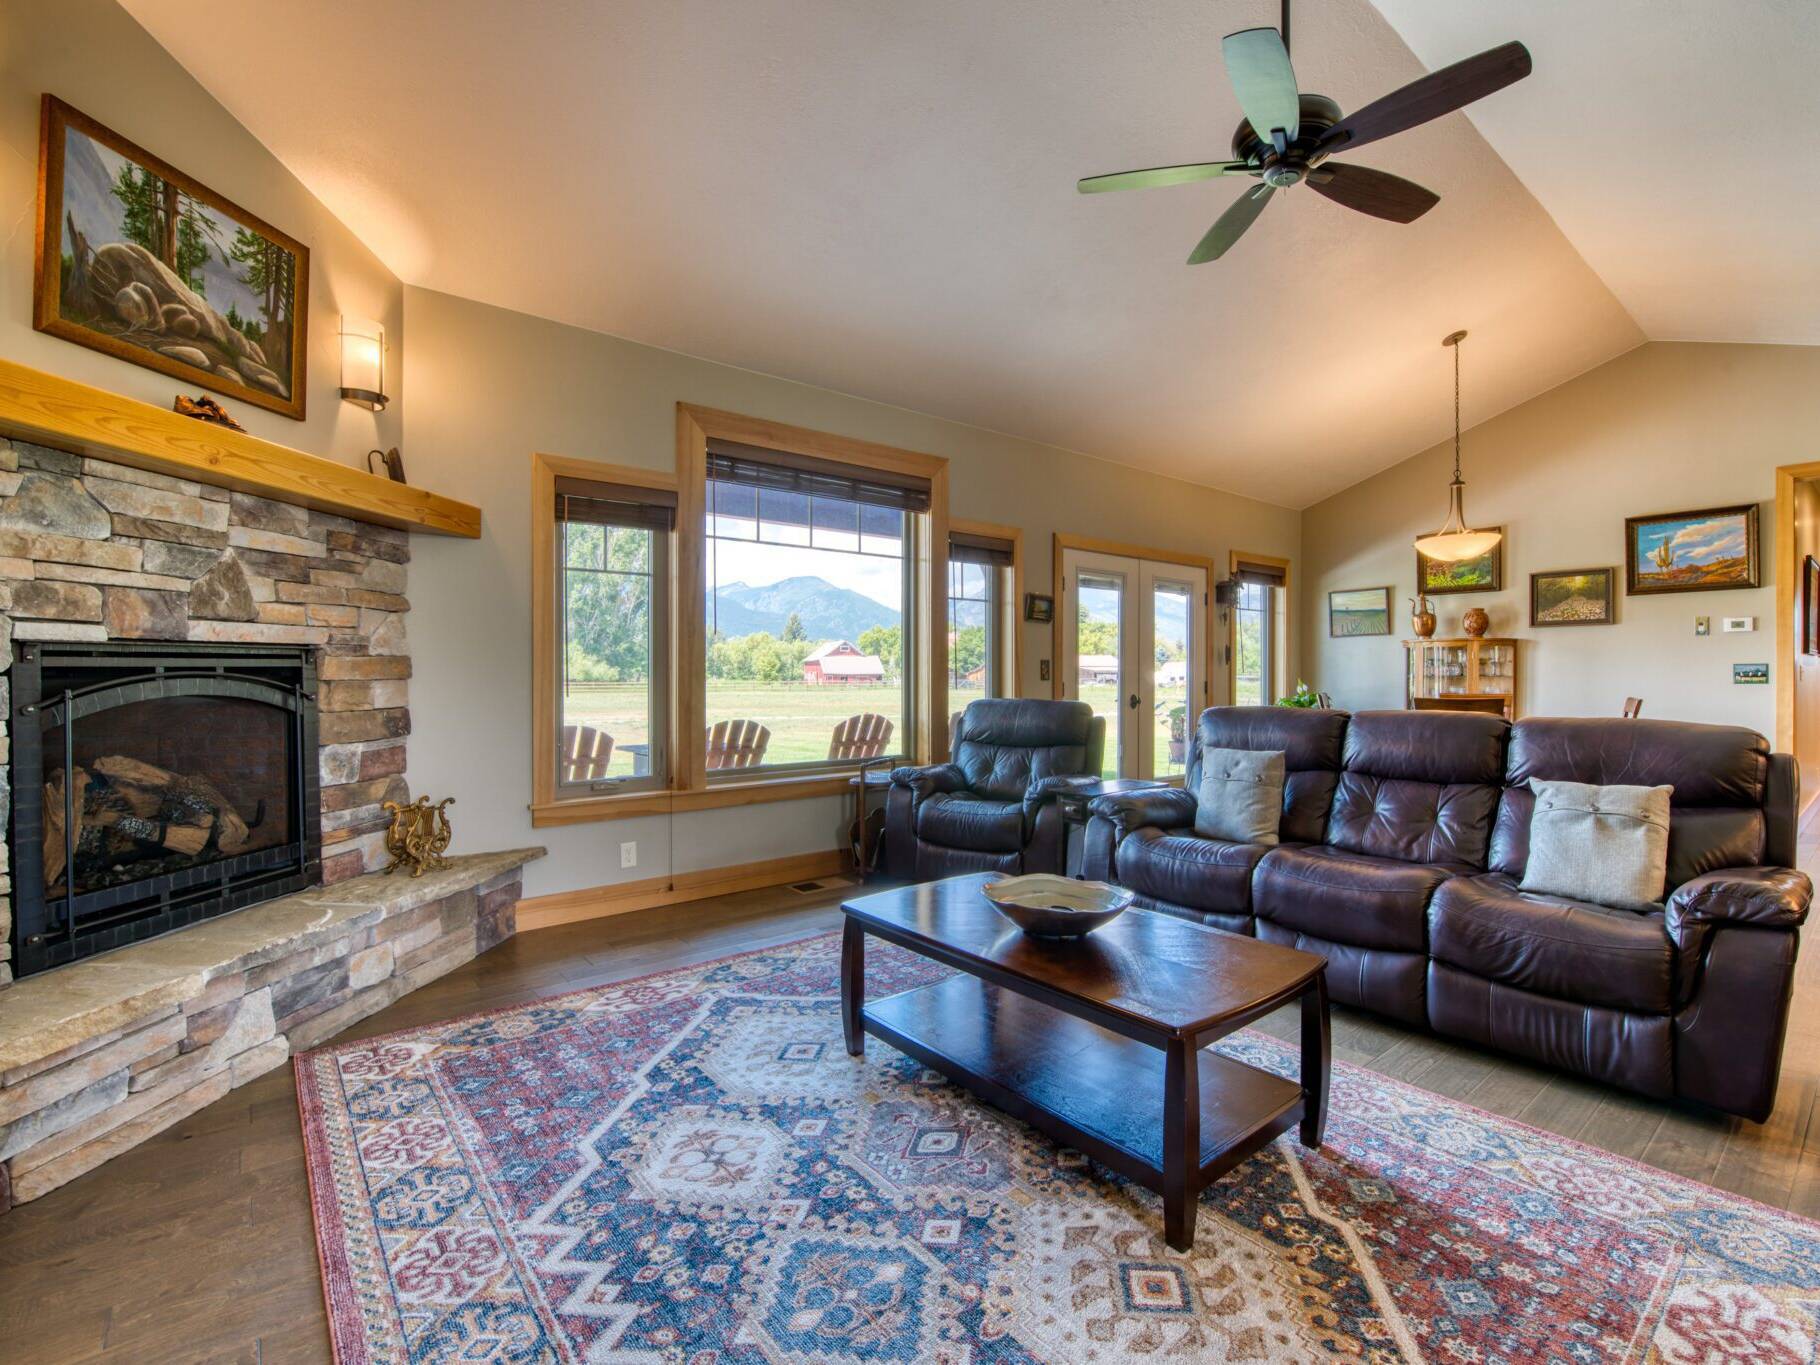 Living room with wood flooring, gas fireplace and wood trim in a custom home in Hamilton, MT